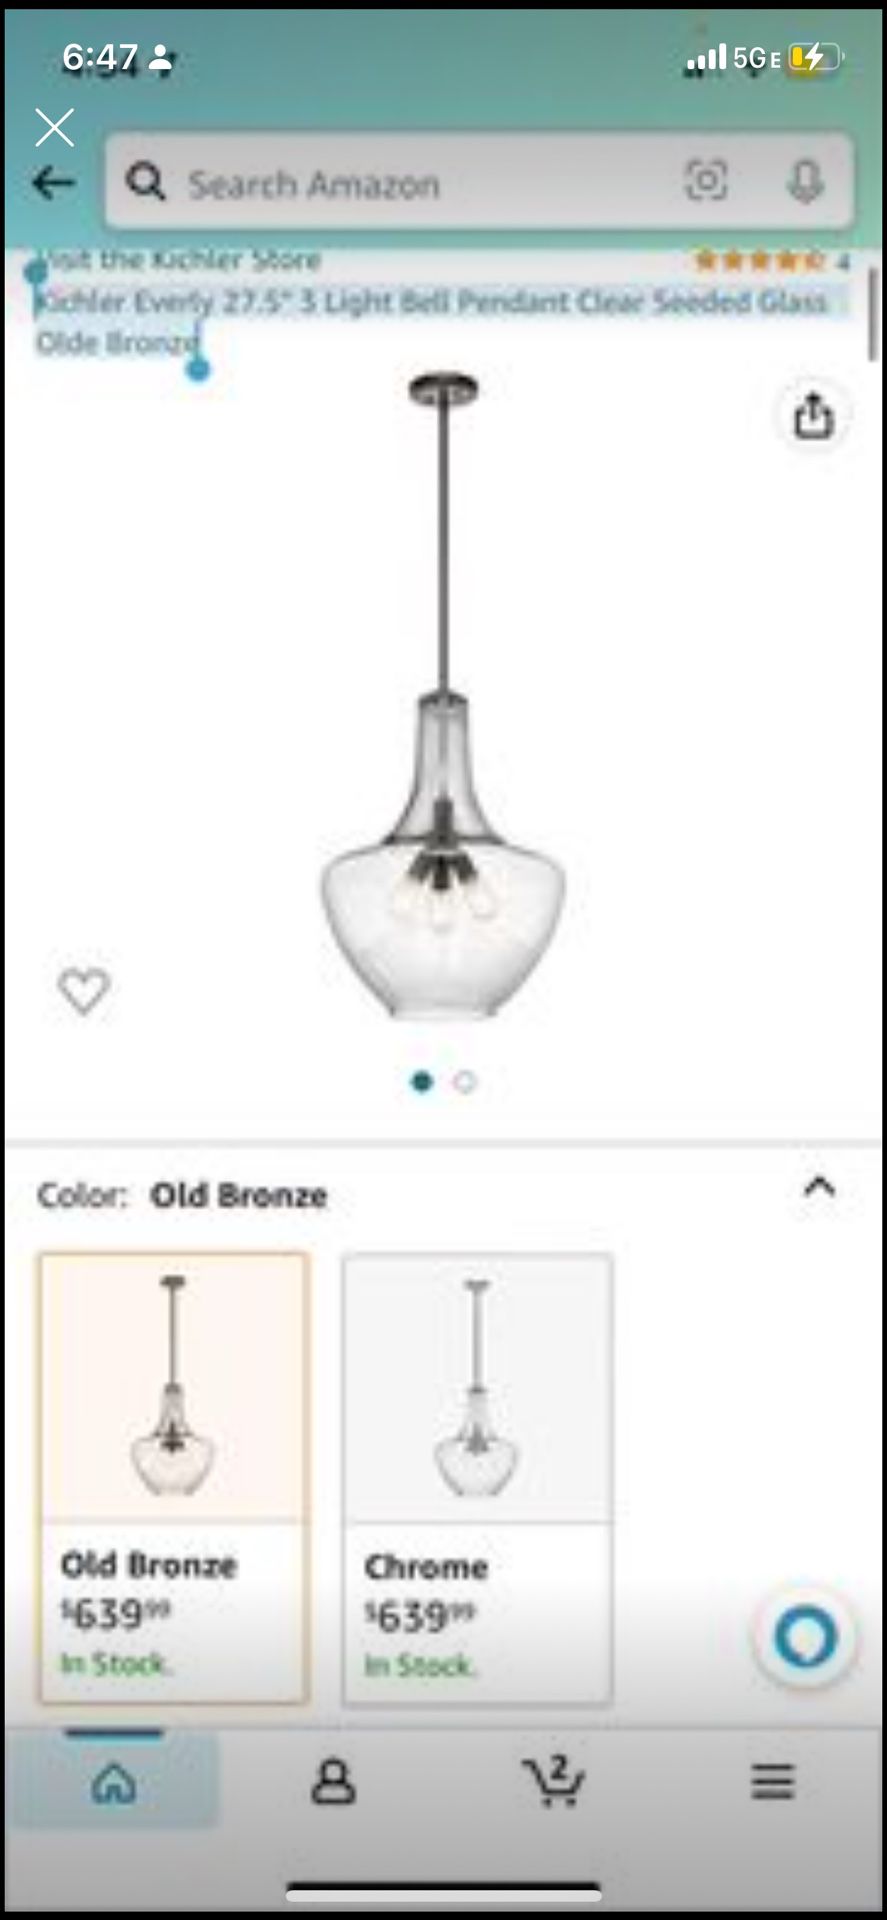 Kichler Everly 27.5" 3 Light Bell Pendant Clear Seeded Glass Olde Bronze MSRP $650  Description The Everly 27.5" three light bell shaped pendant comes